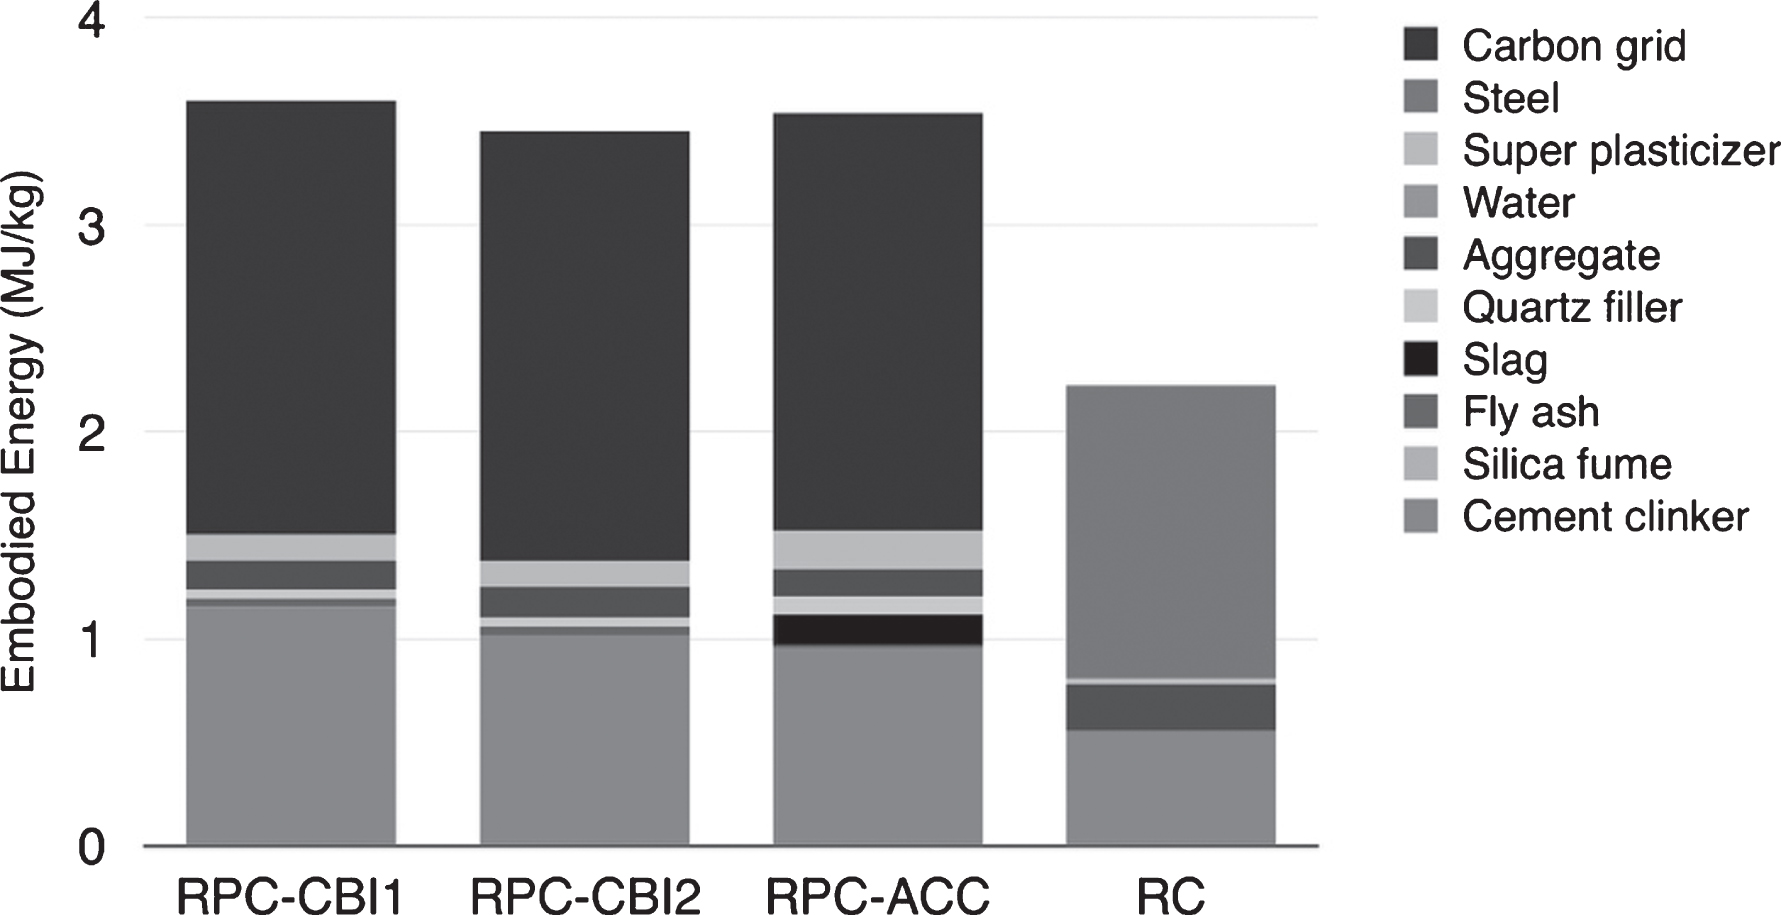 Calculated embodied energies for the different RPC mixes, including reinforcement. As a comparison a standard steel reinforced concrete (RC) was calculated. Note that the embodied energy is calculated for 1 kg of reinforced concrete.